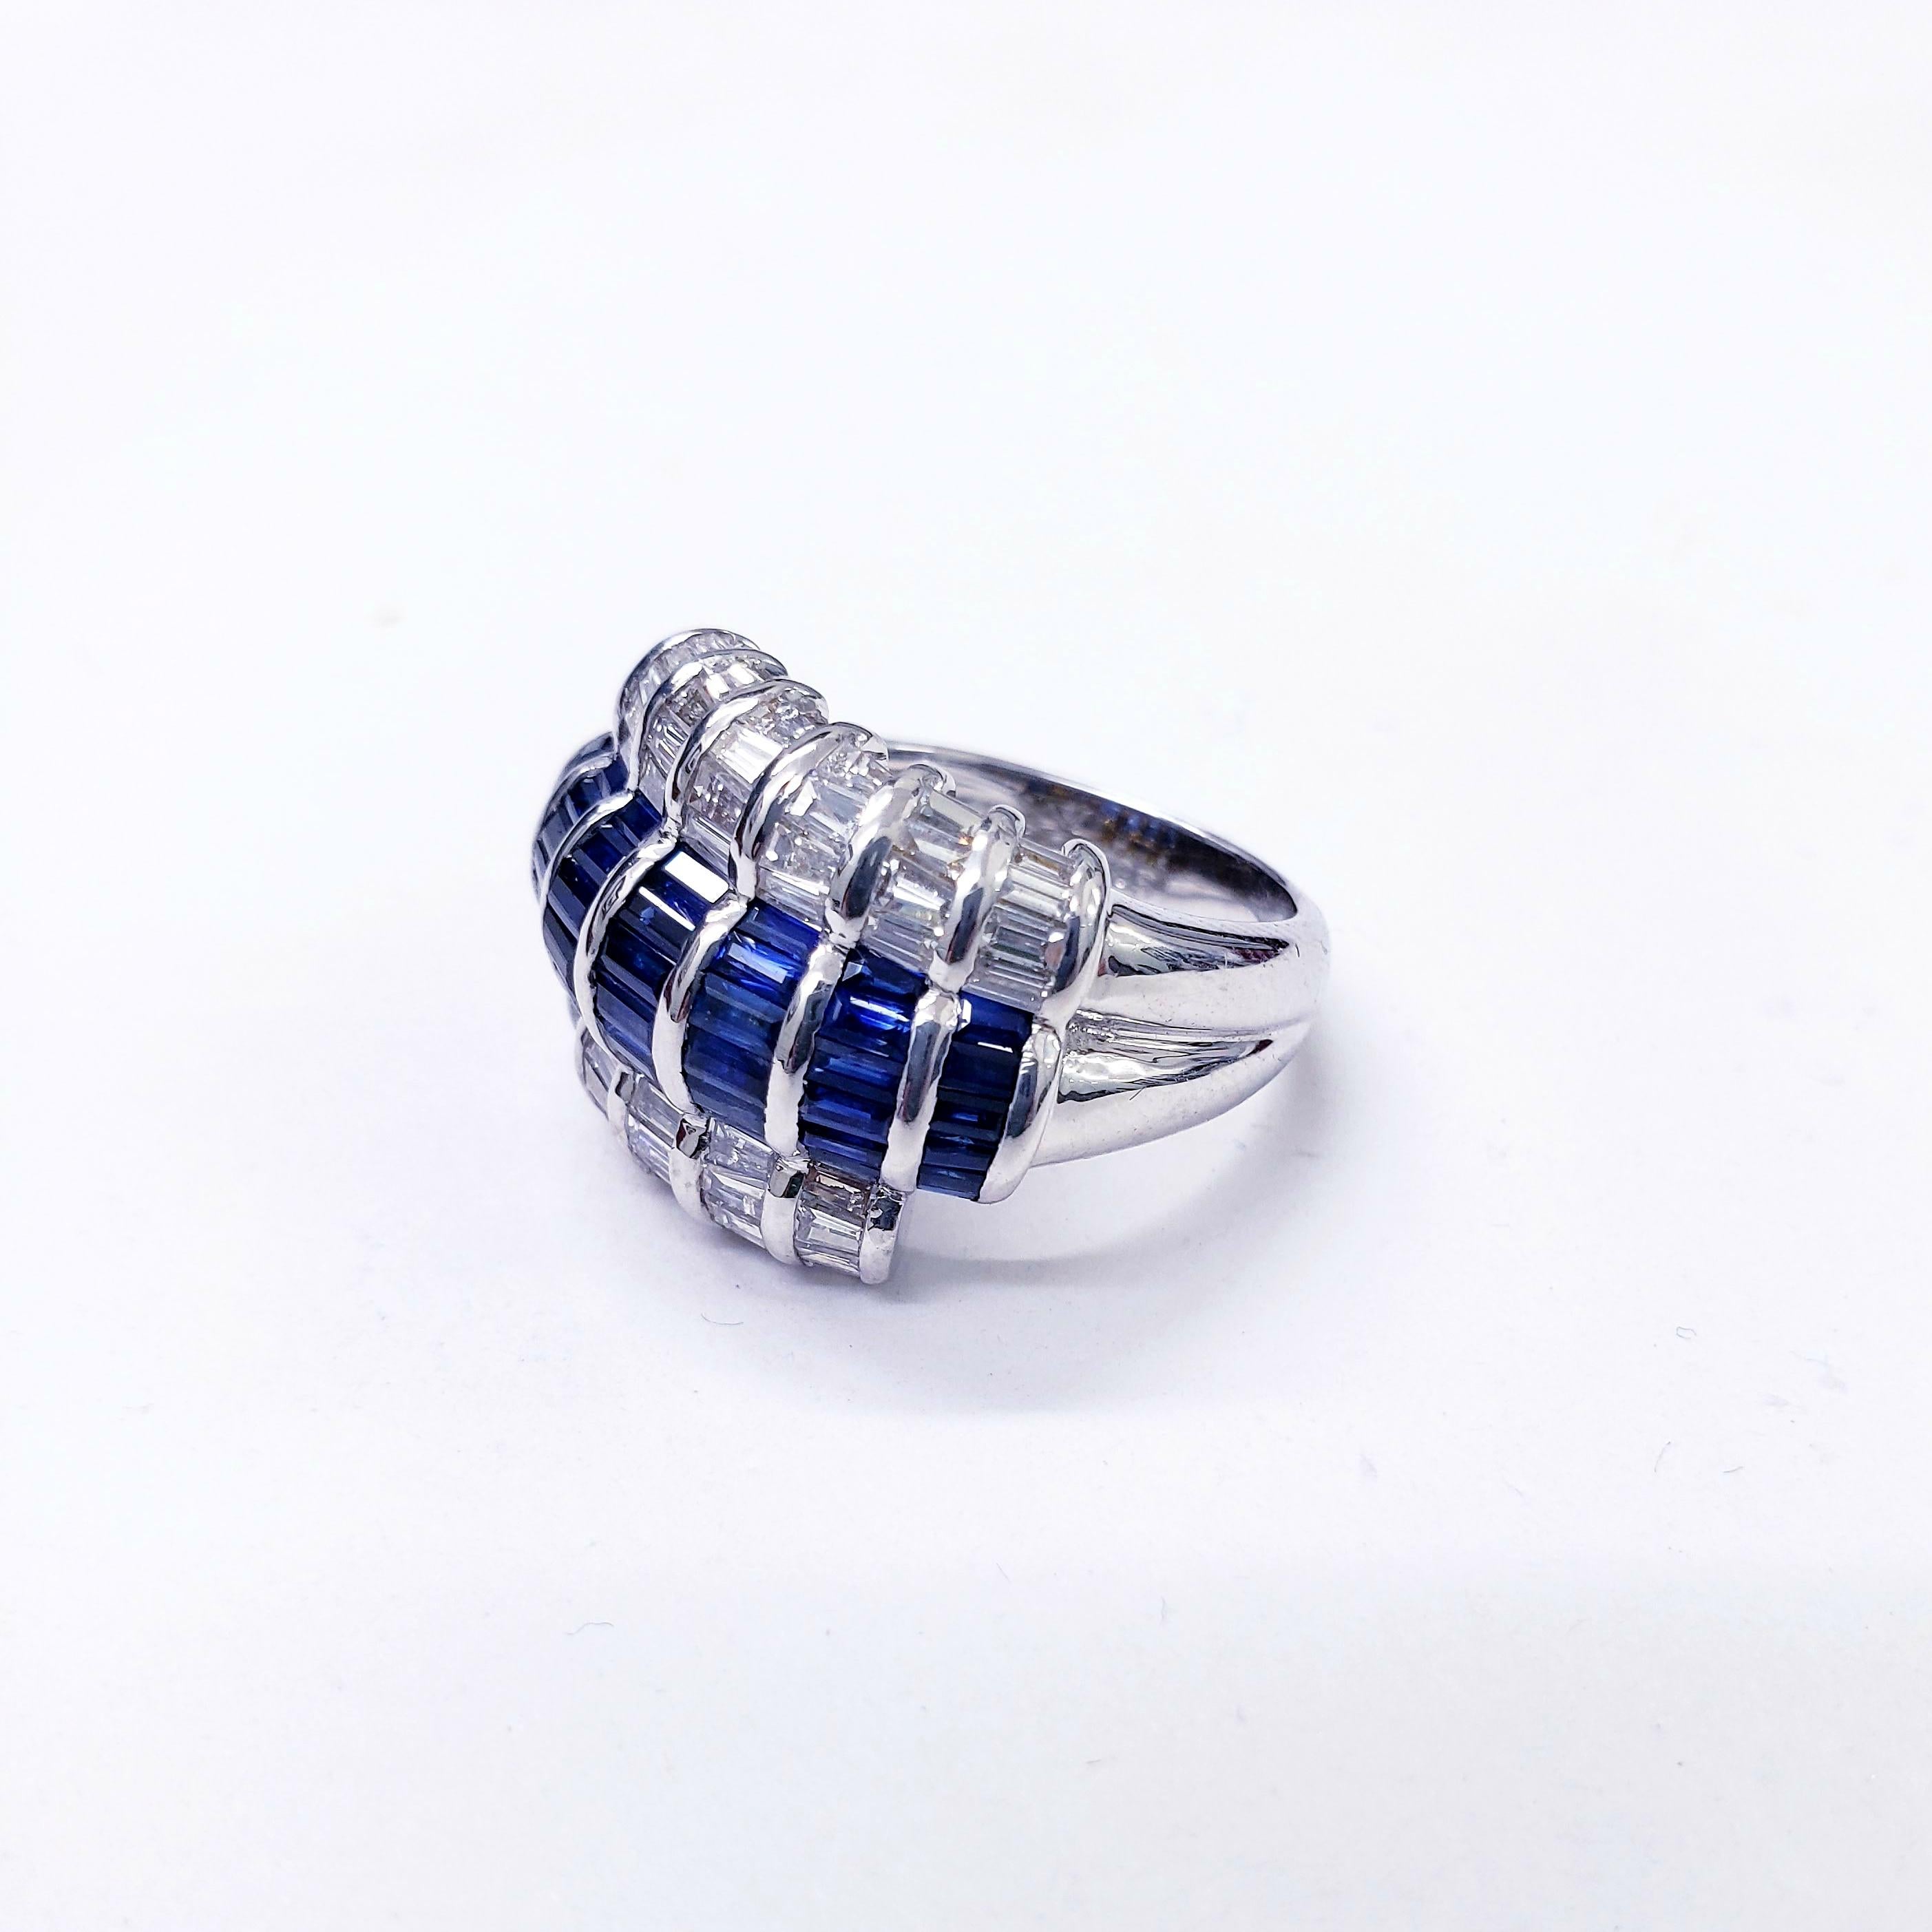 Women's Le Vian 5.02 Carat Total Weight Diamonds and Blue Sapphires Cocktail Ring 18k For Sale